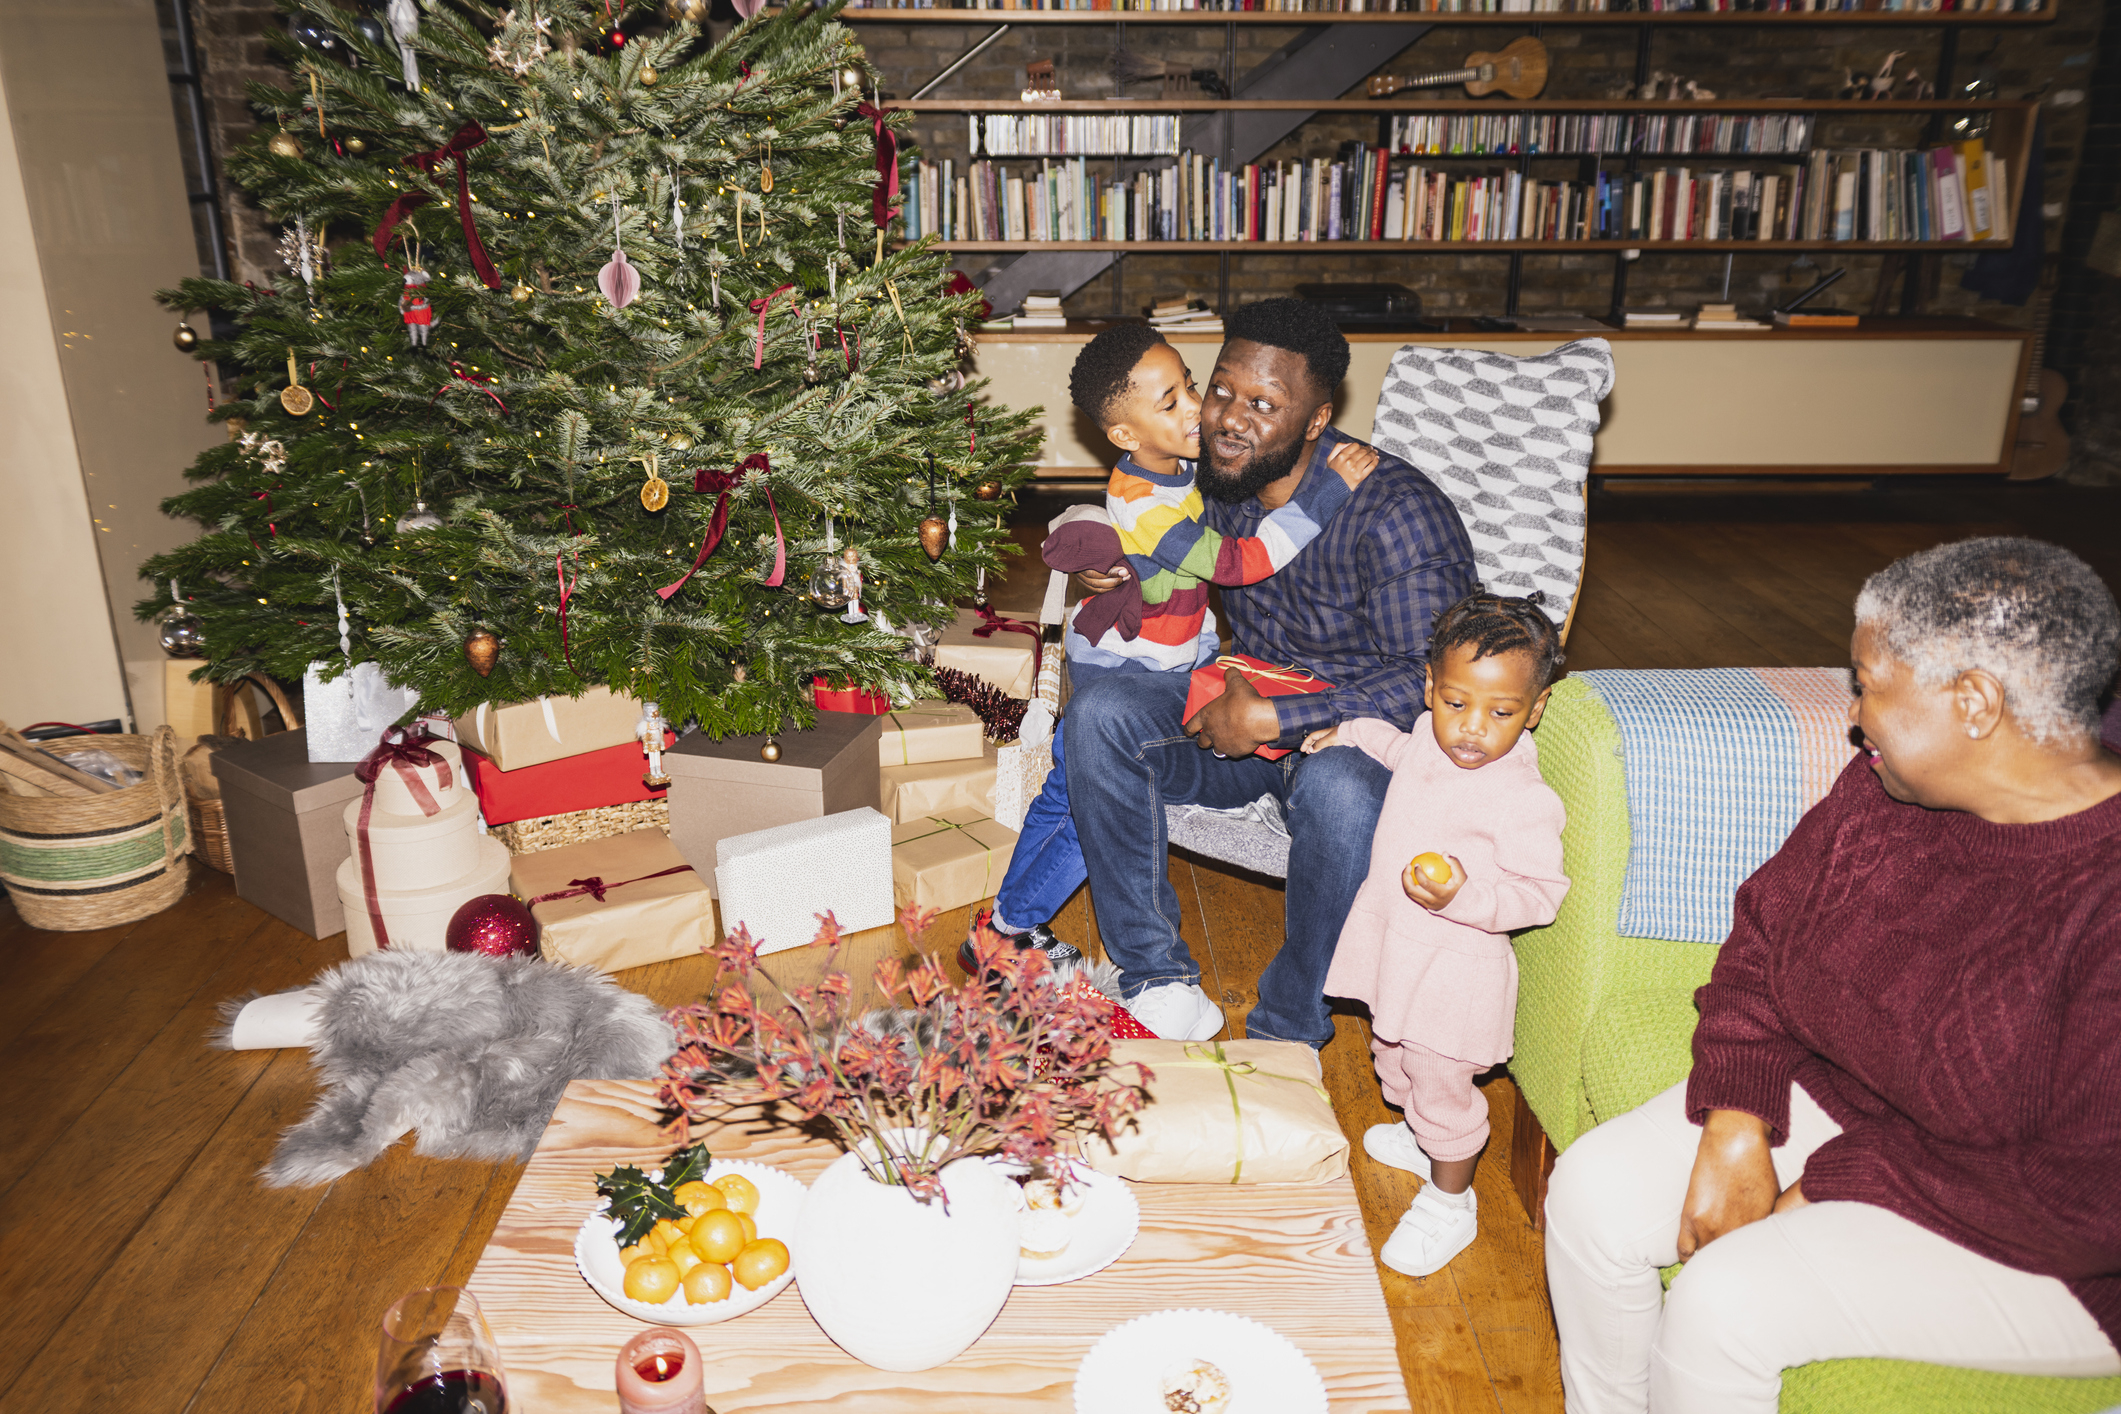 Family with two children next to a Christmas tree, sharing a moment, with presents and a decorated table in the foreground